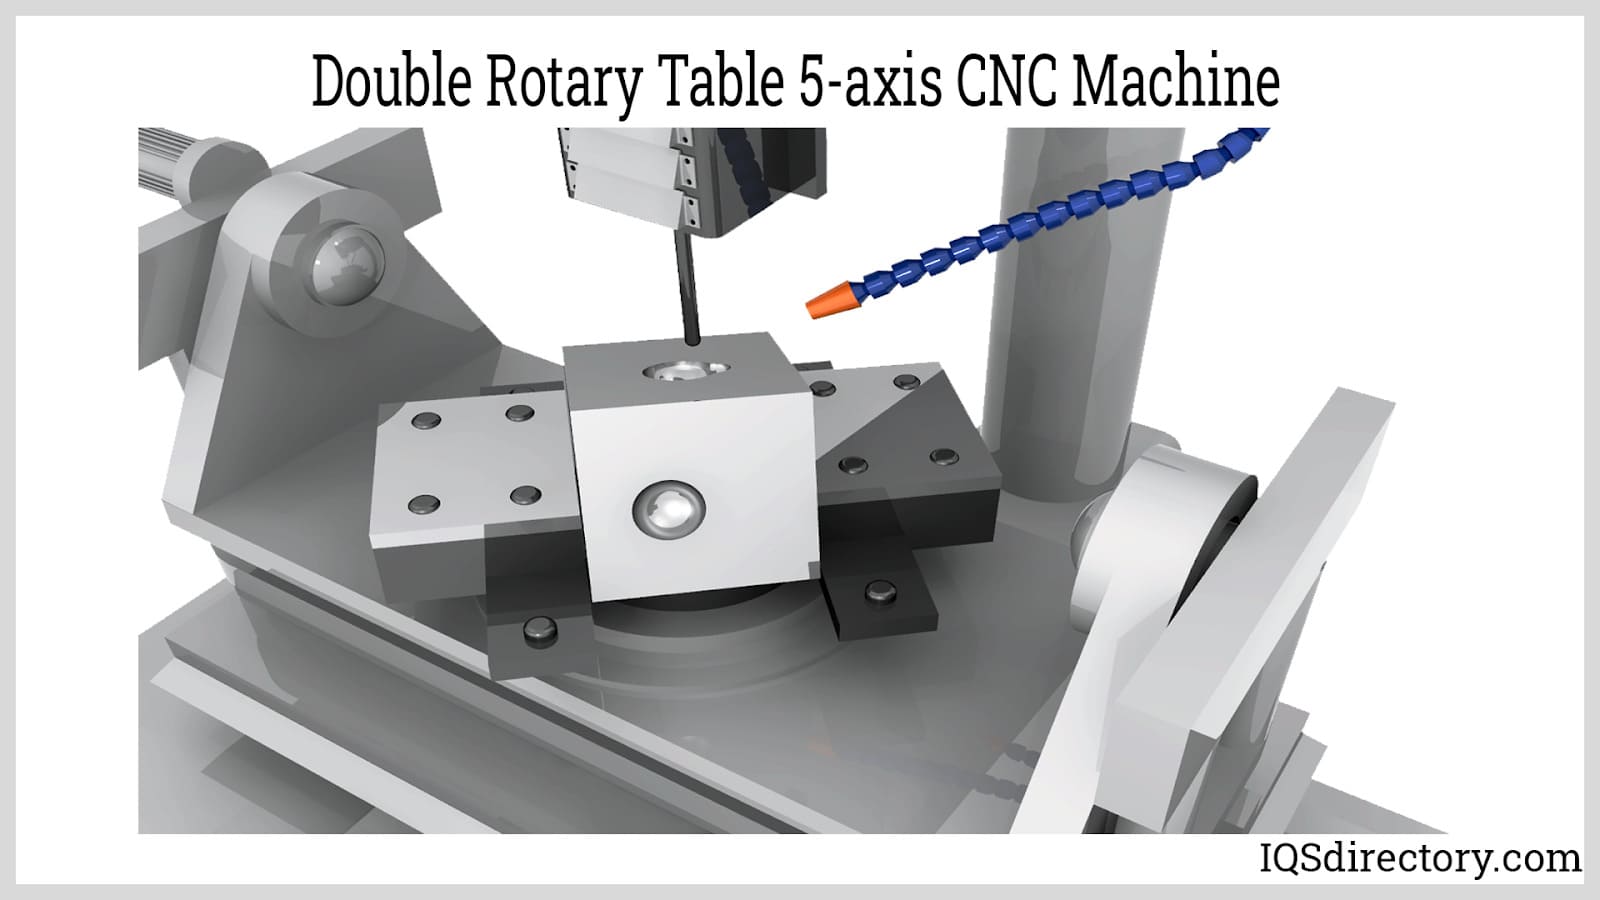 Double Rotary Table 5-axis CNC Machine